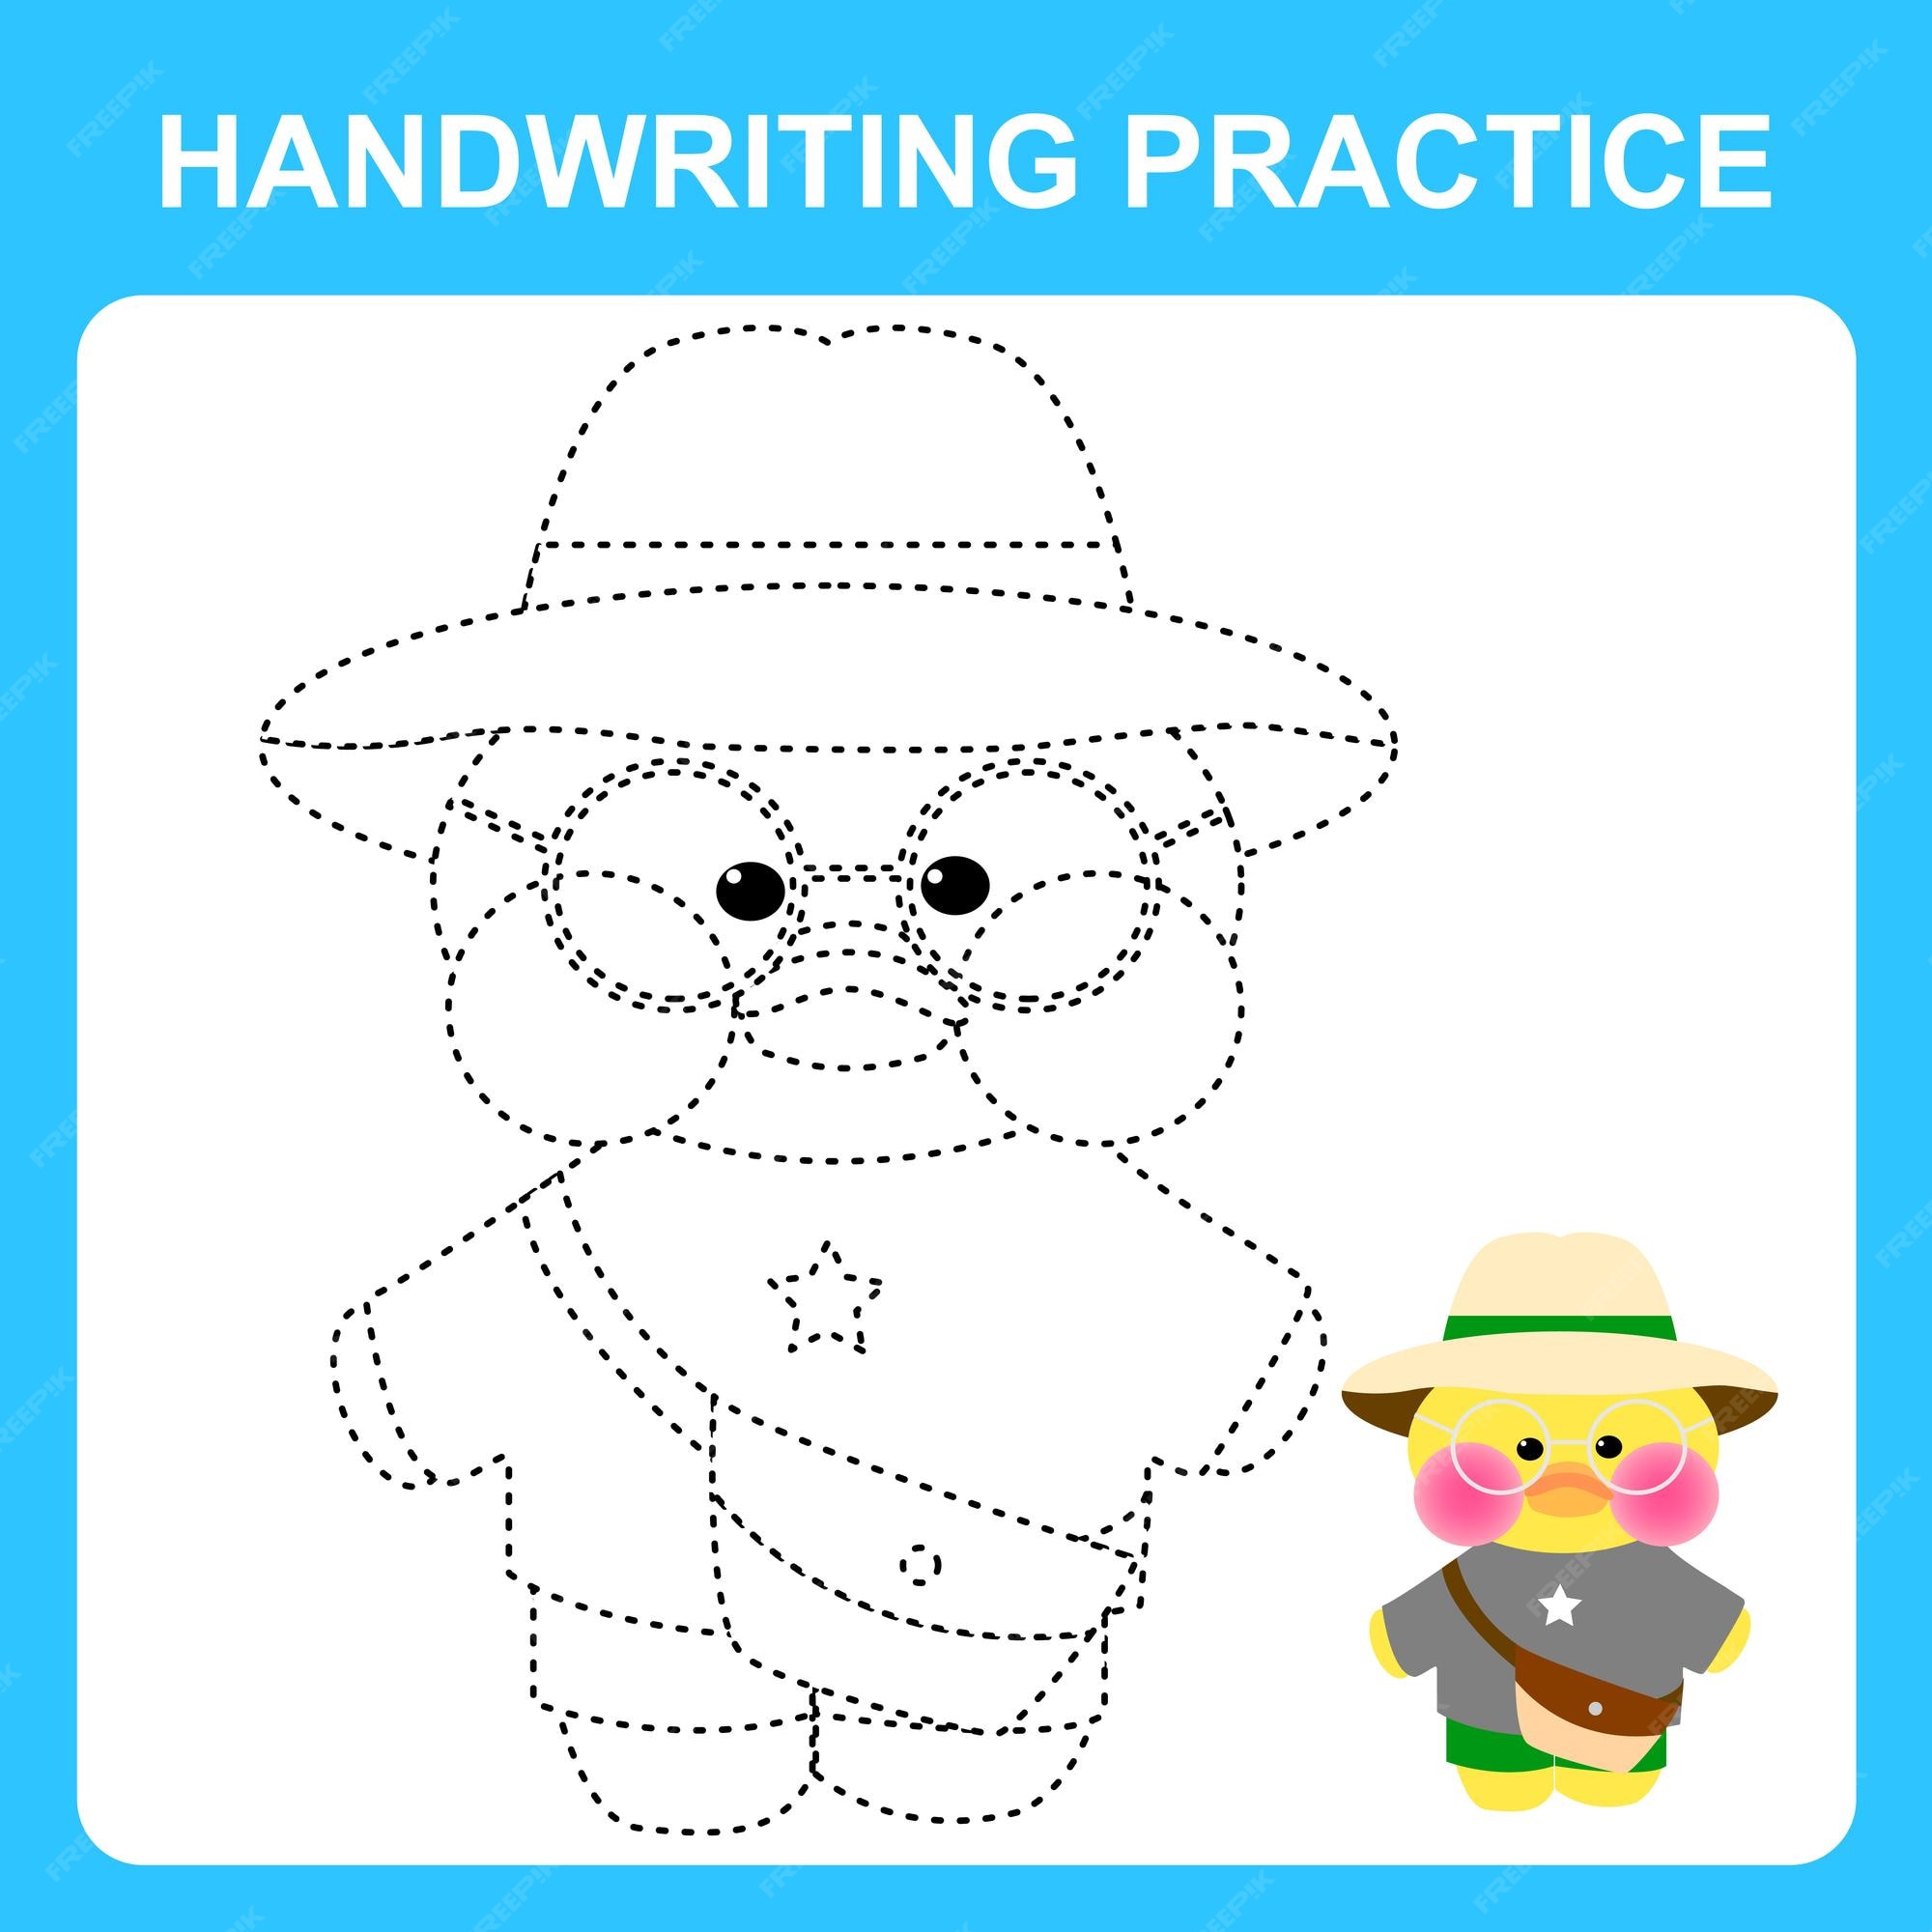 Premium vector handwriting practice trace the lines and color the lalafanfan duck wearing a hat educational kids game coloring book sheet printable worksheet vector illustration